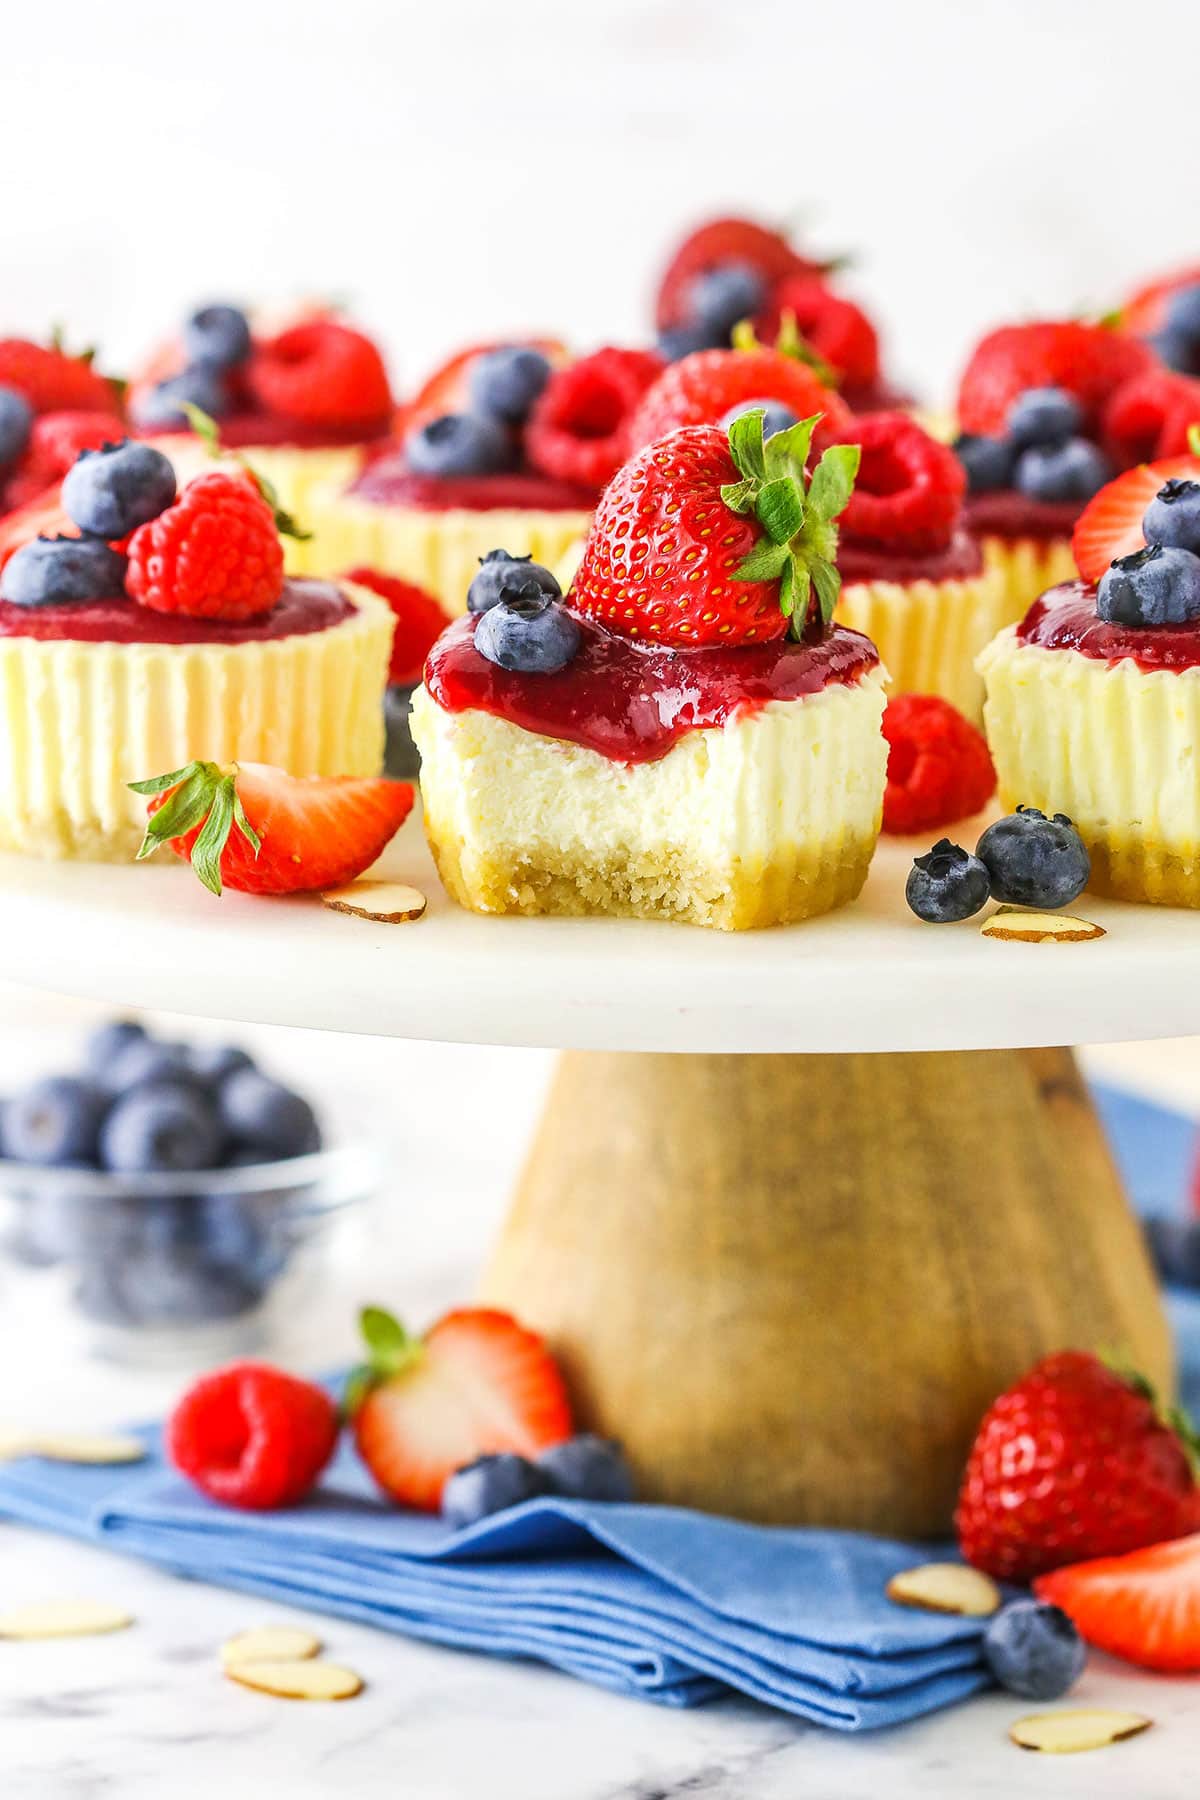 Whole Mini Berry Almond Cheesecakes with one missing a bite topped with strawberries, blueberries and raspberries on a white cake stand